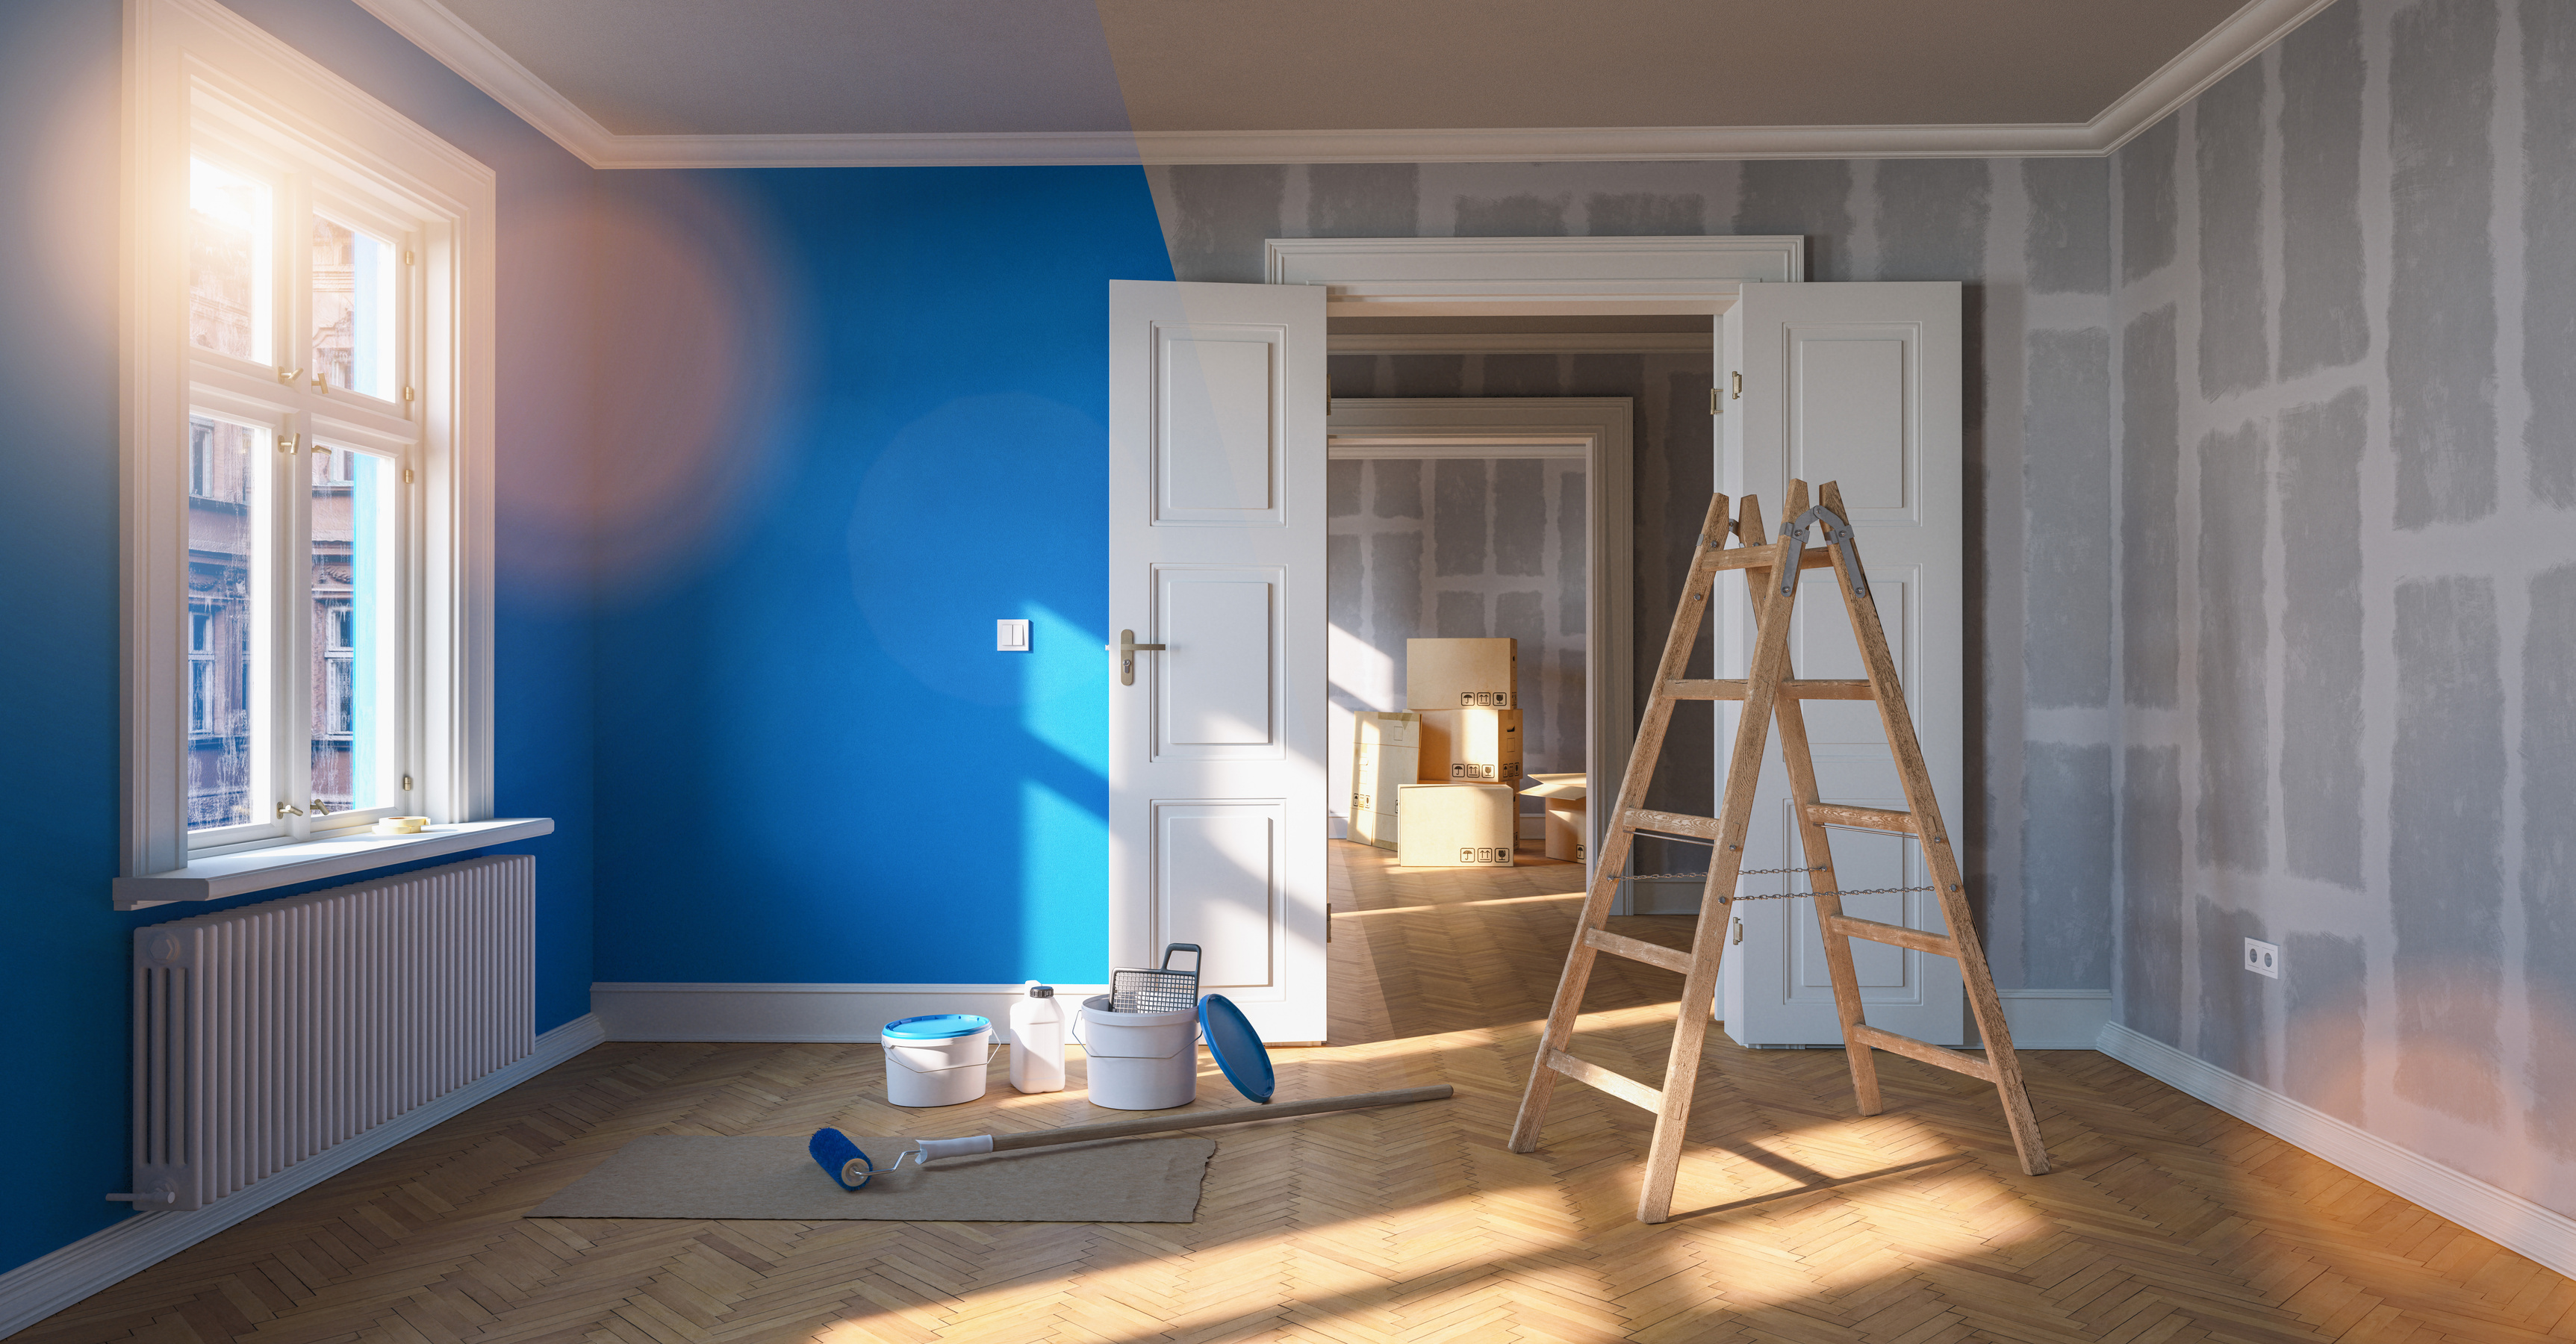 Painting Wall Blue in Room before and after Restoration or Refur